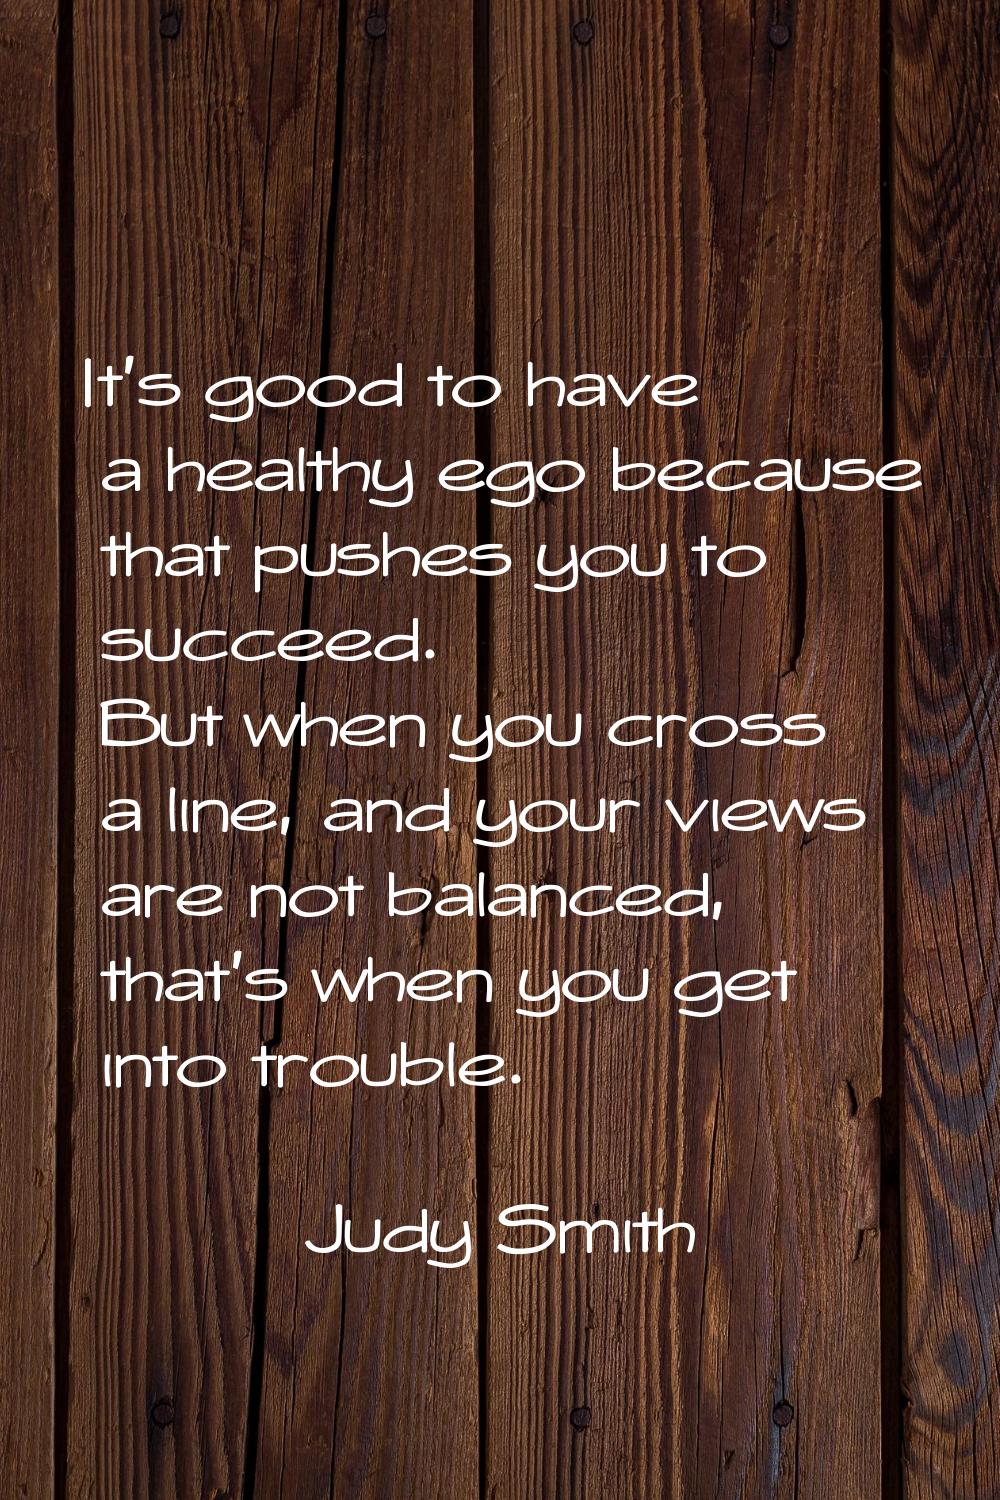 It's good to have a healthy ego because that pushes you to succeed. But when you cross a line, and 